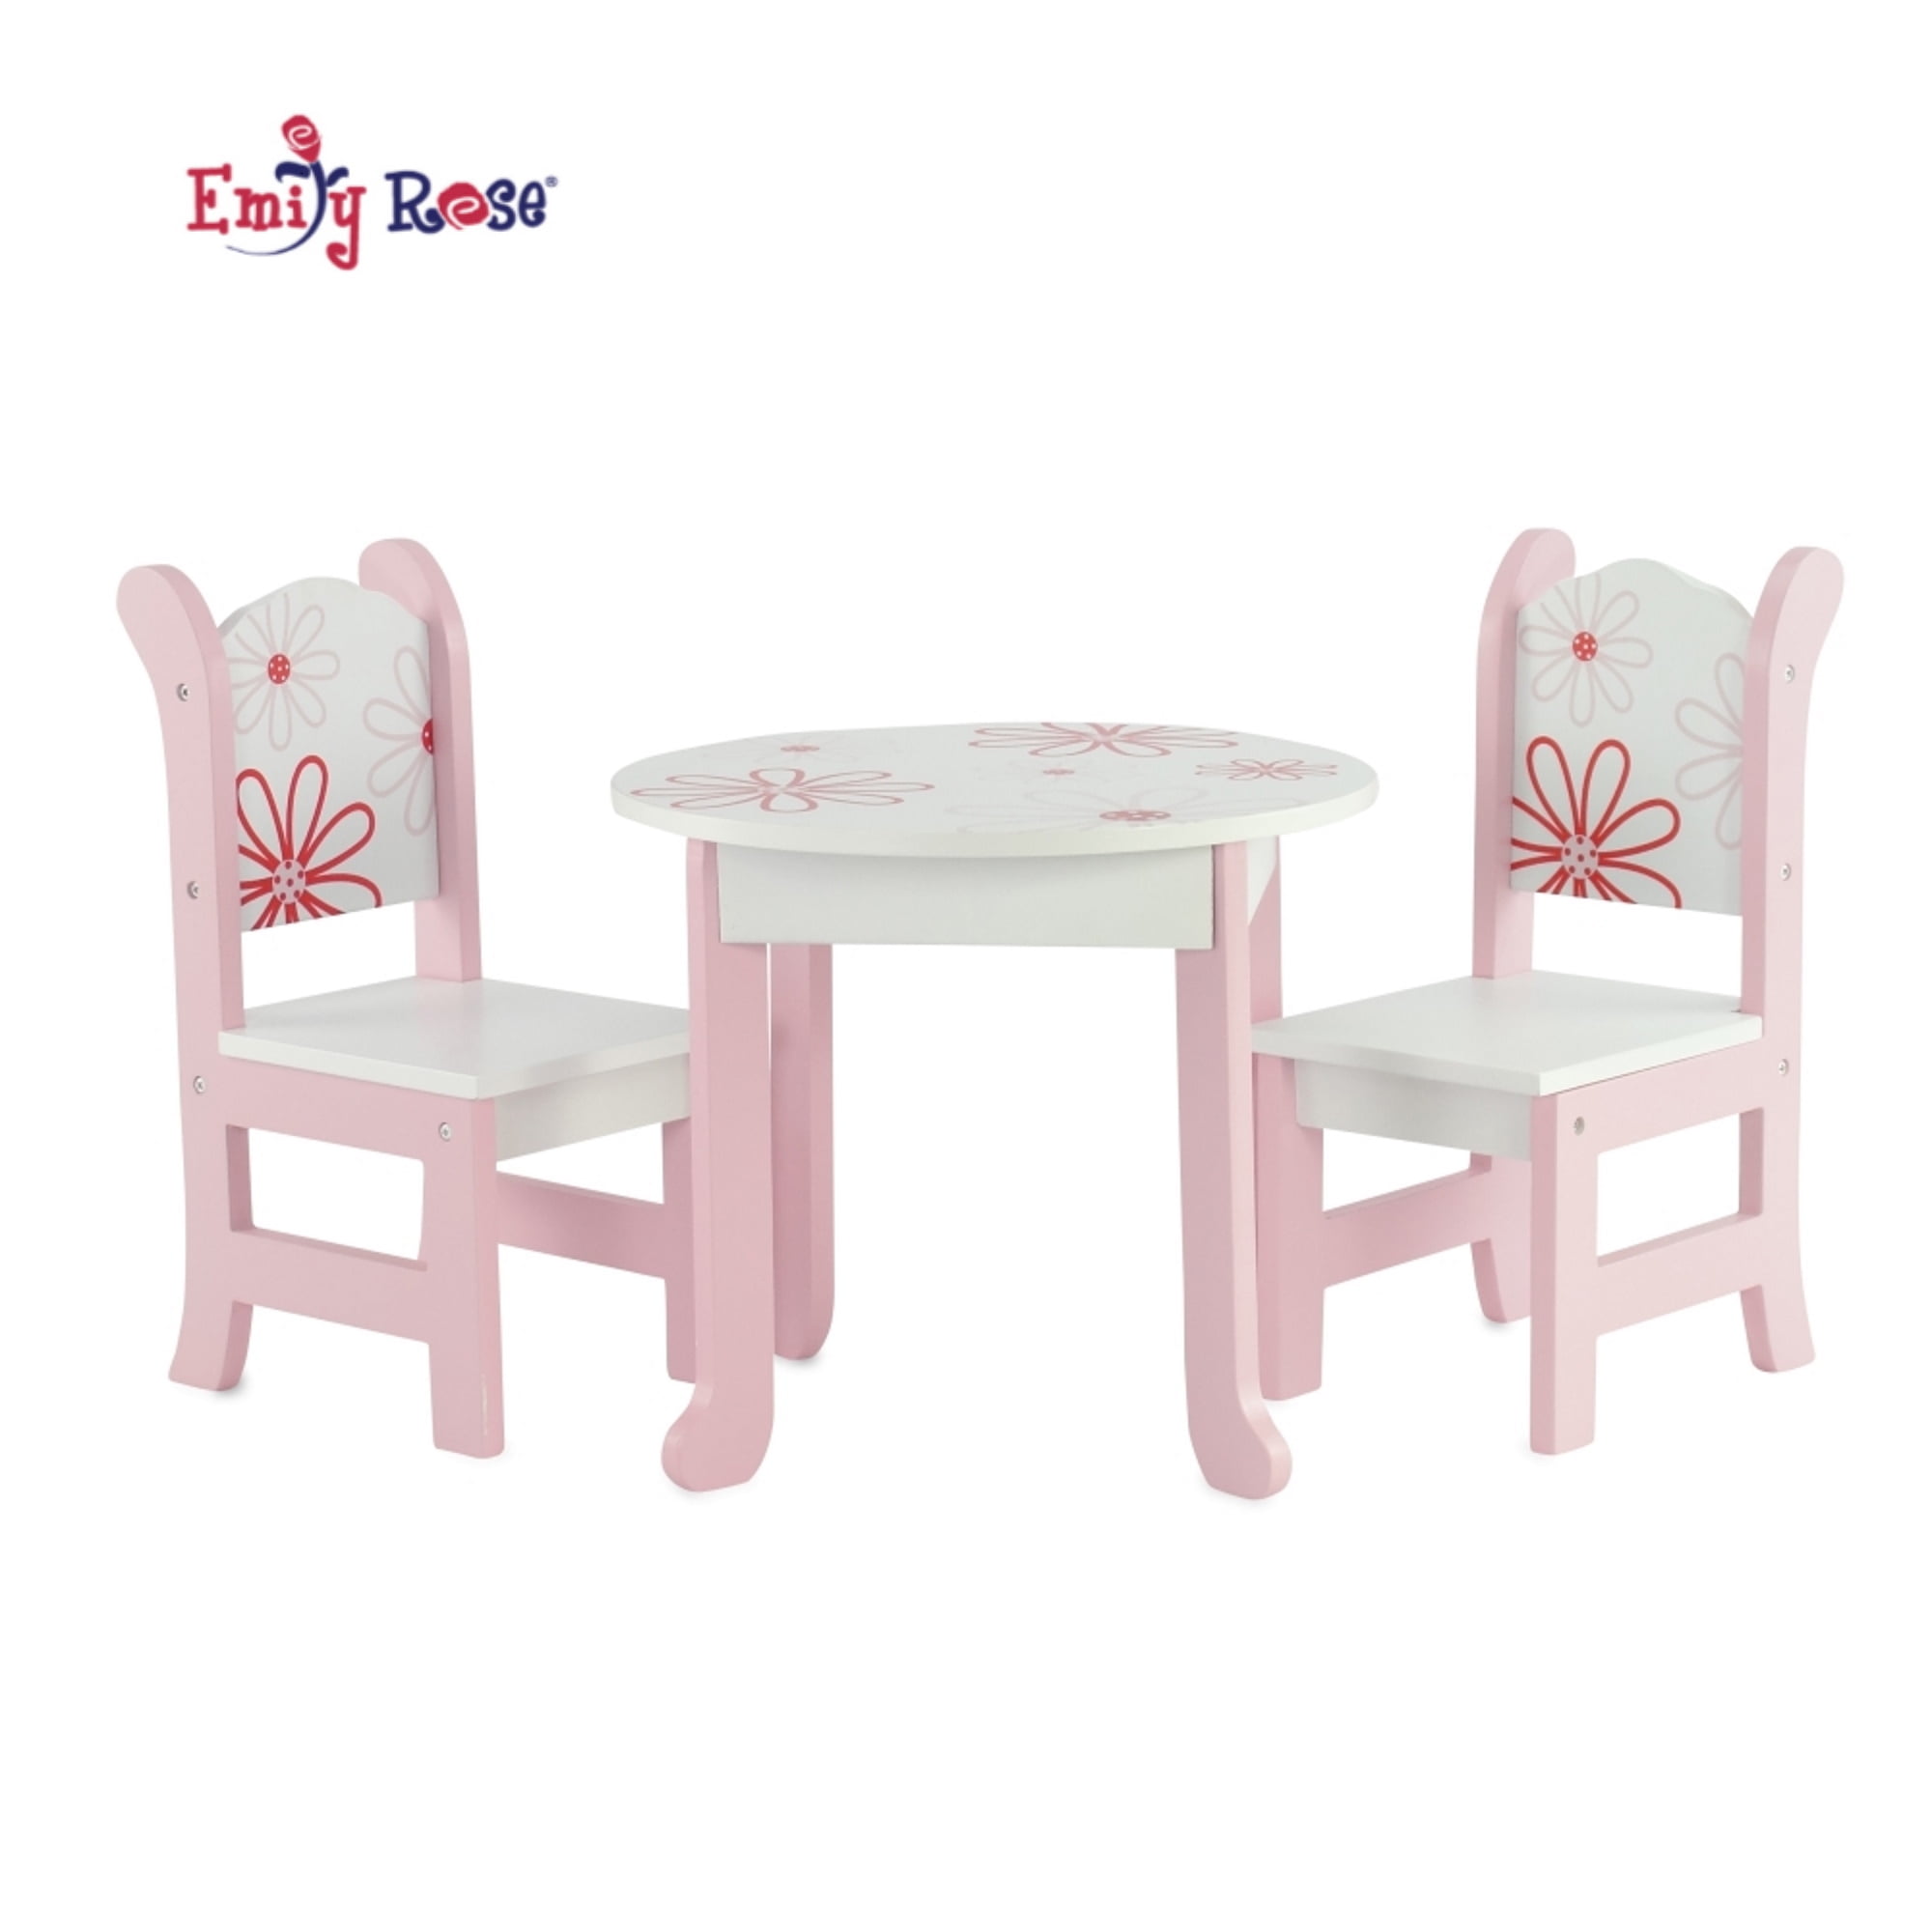 ROSE DOLLHOUSE FURNITURE SIZE GARDEN SWING ARMED CHAIRS SET FOR Dolls 